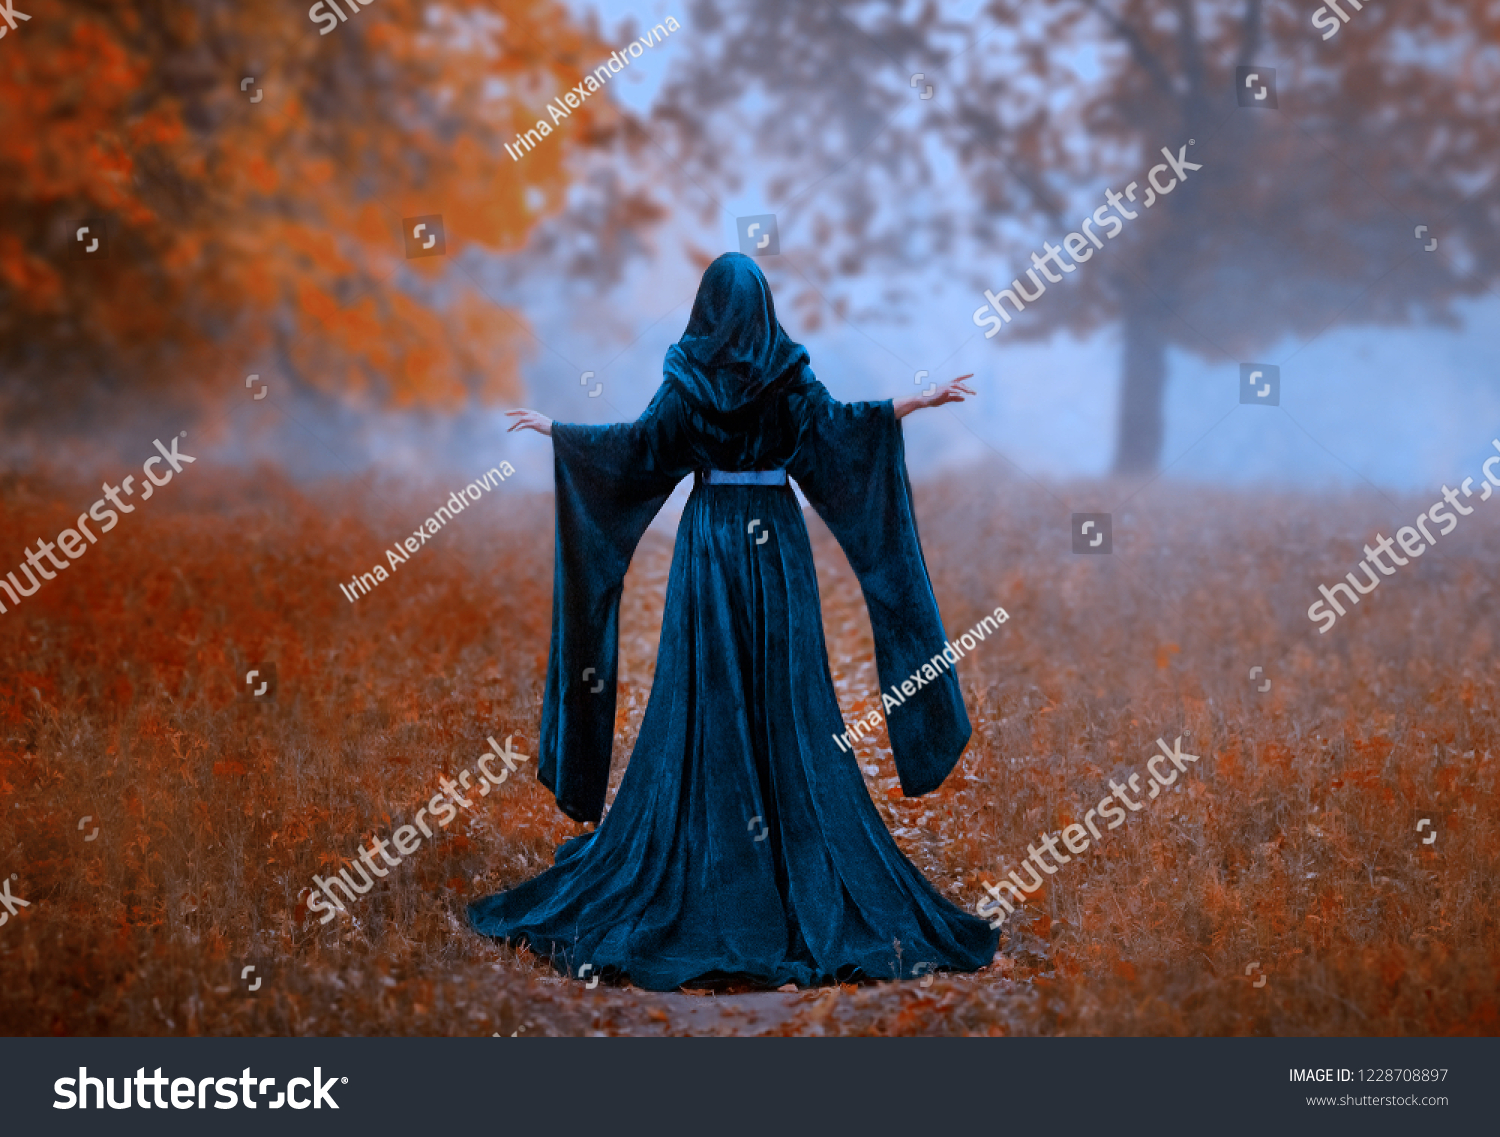 young Dark queen holds hands raised. autumn mystic forest fog orange tree. vintage blue velvet cape dress hood. art photo fantasy mysterious woman silhouette medieval back witch, Halloween design  #1228708897